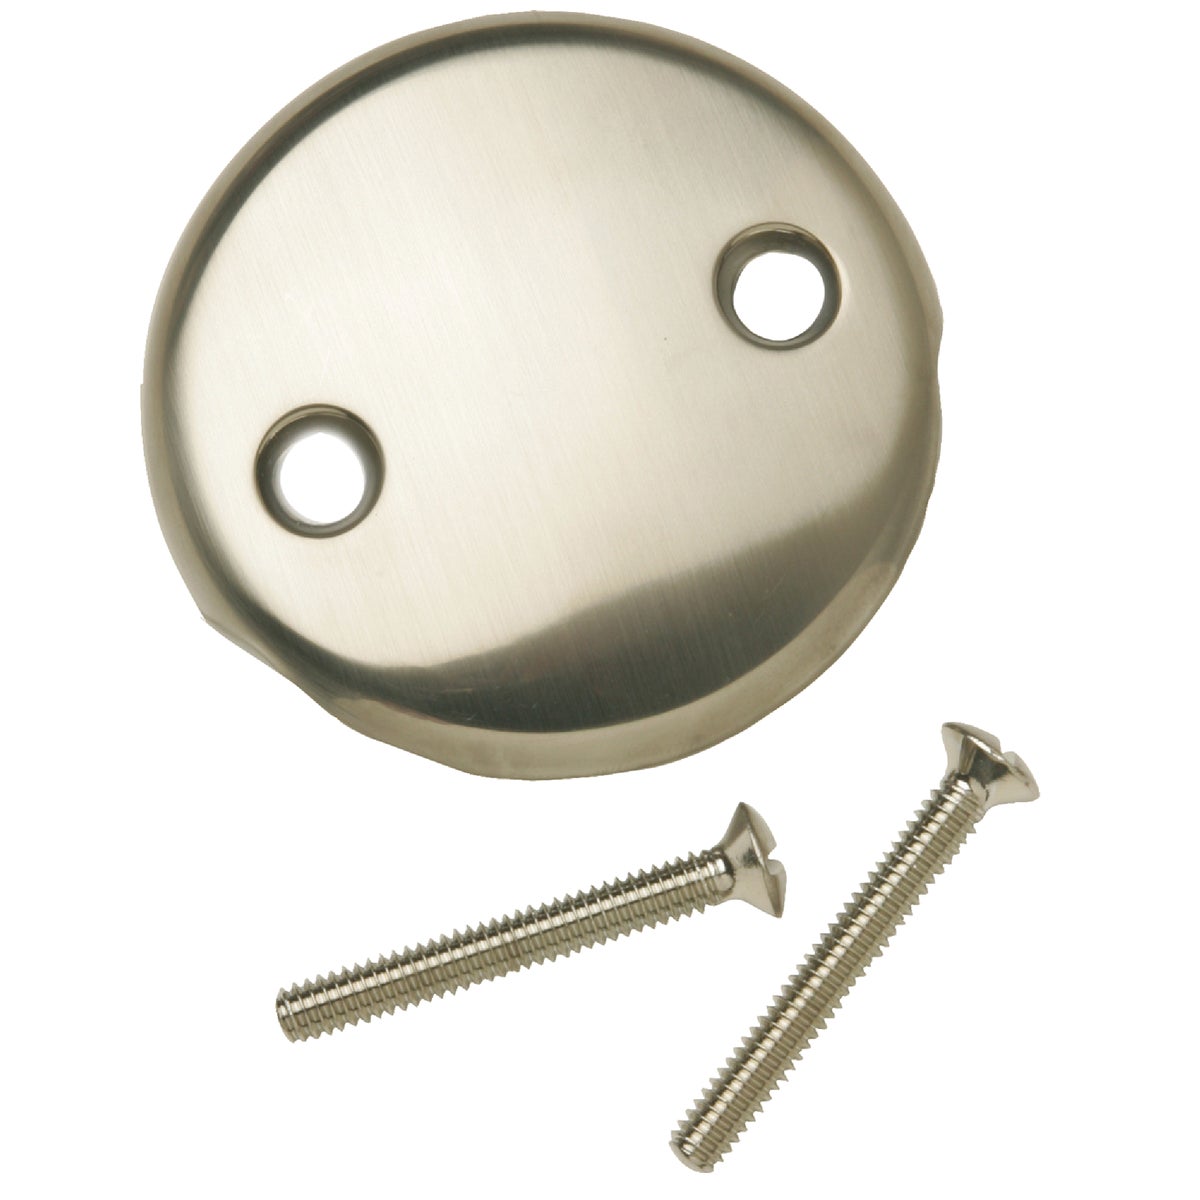 Do it Two-Hole Brushed Nickel Bath Drain Face Plate